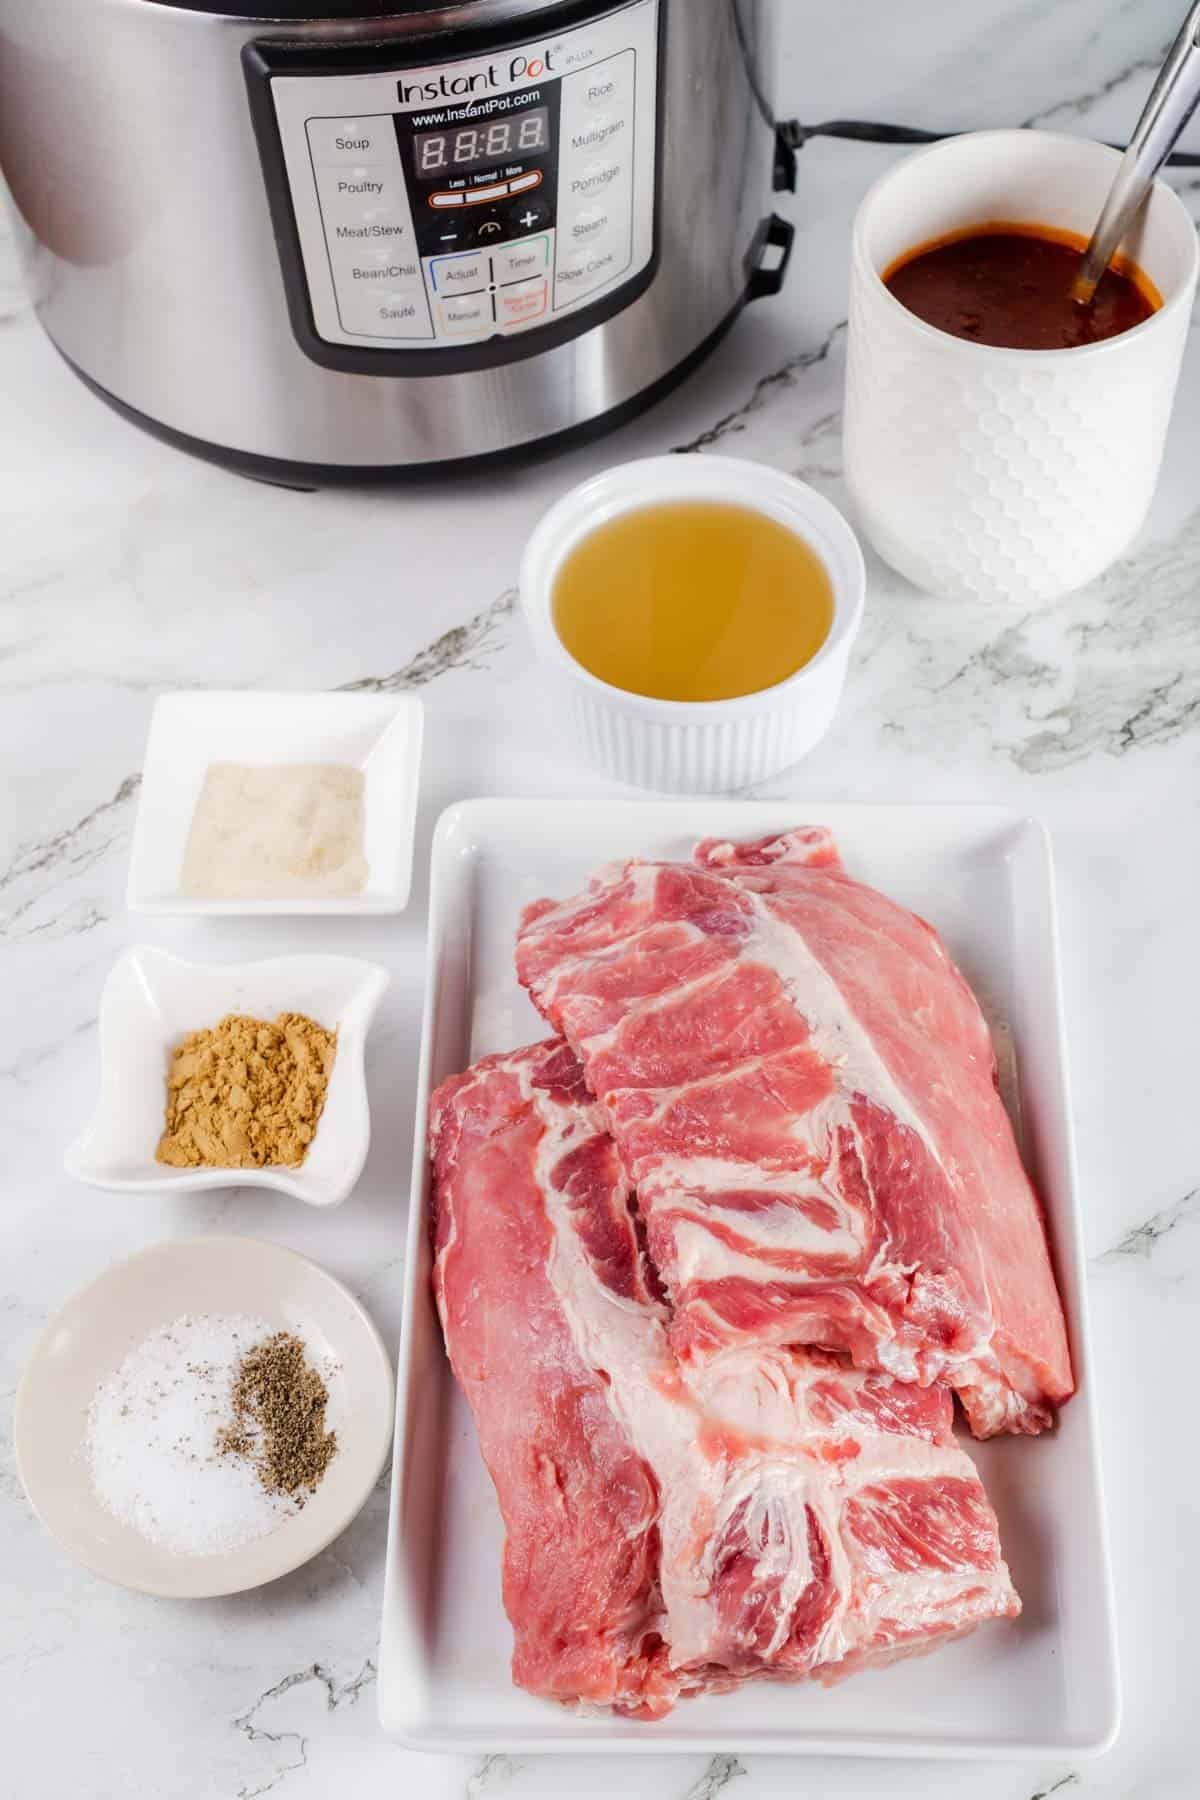 Baby Back Ribs, Ground Ginger, Tomato Paste and the Rest of the Rib Ingredients on a Marble Countertop with an Instant Pot